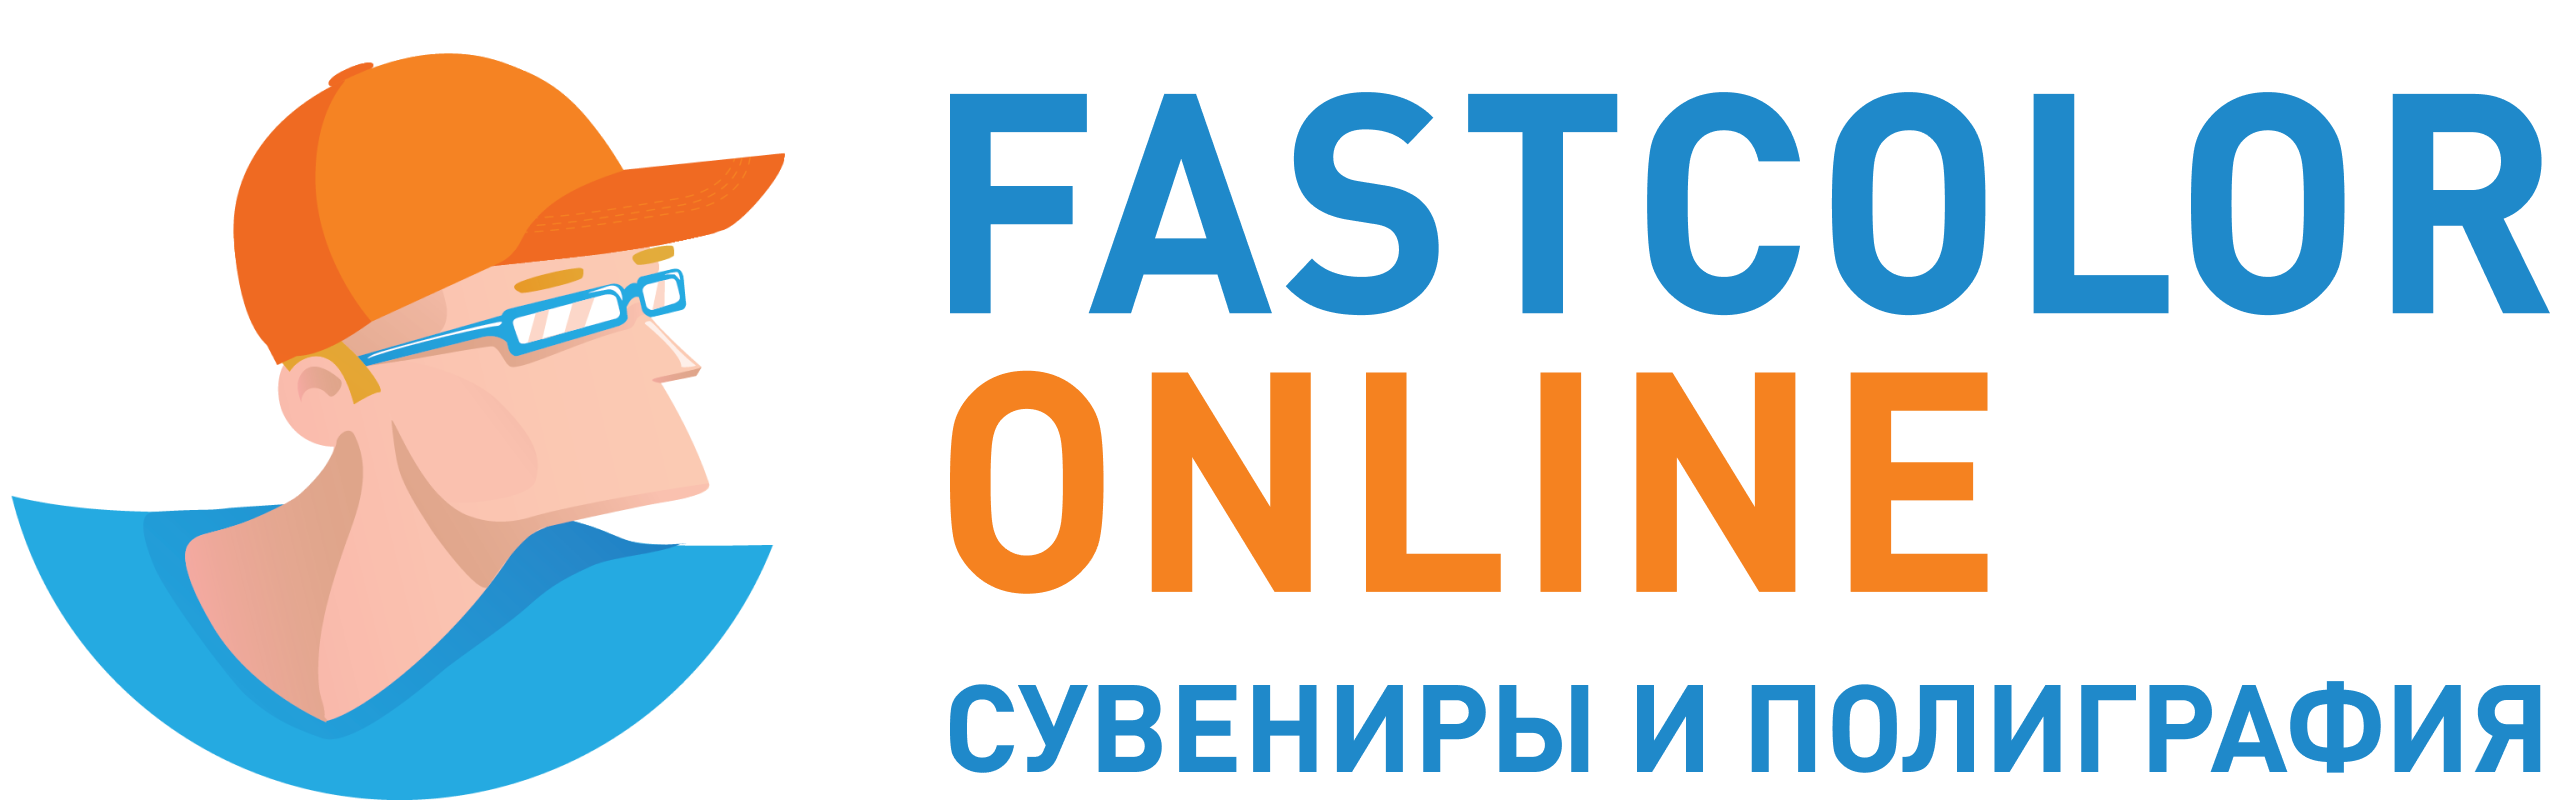 fastcolor.online